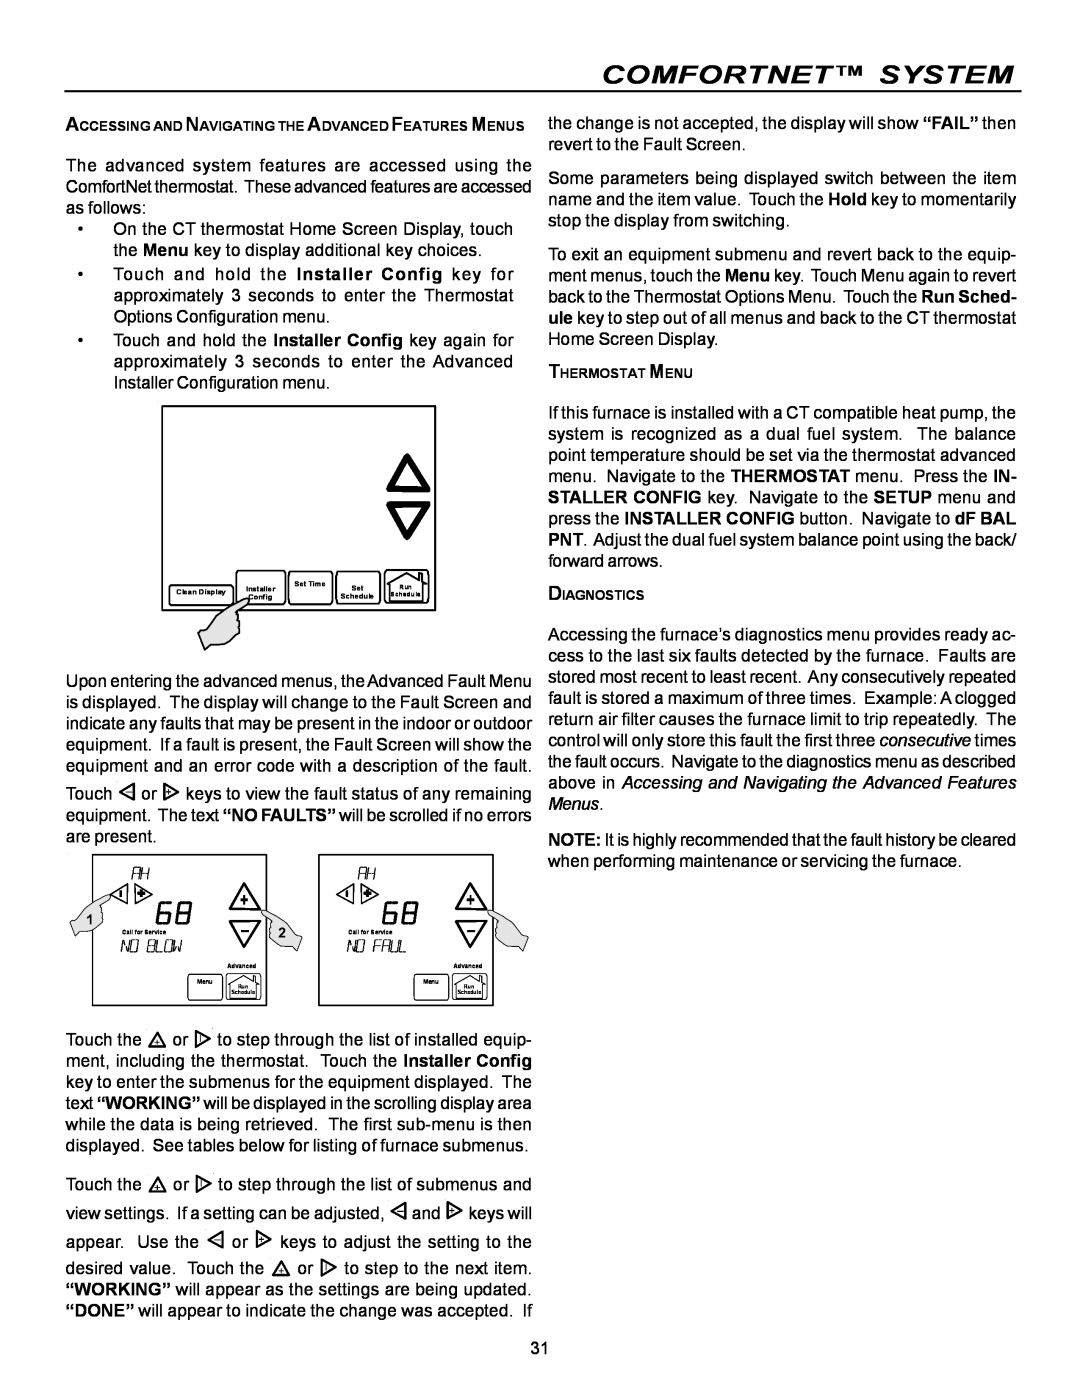 Goodman Mfg VC8 instruction manual Comfortnet System, Touch the 